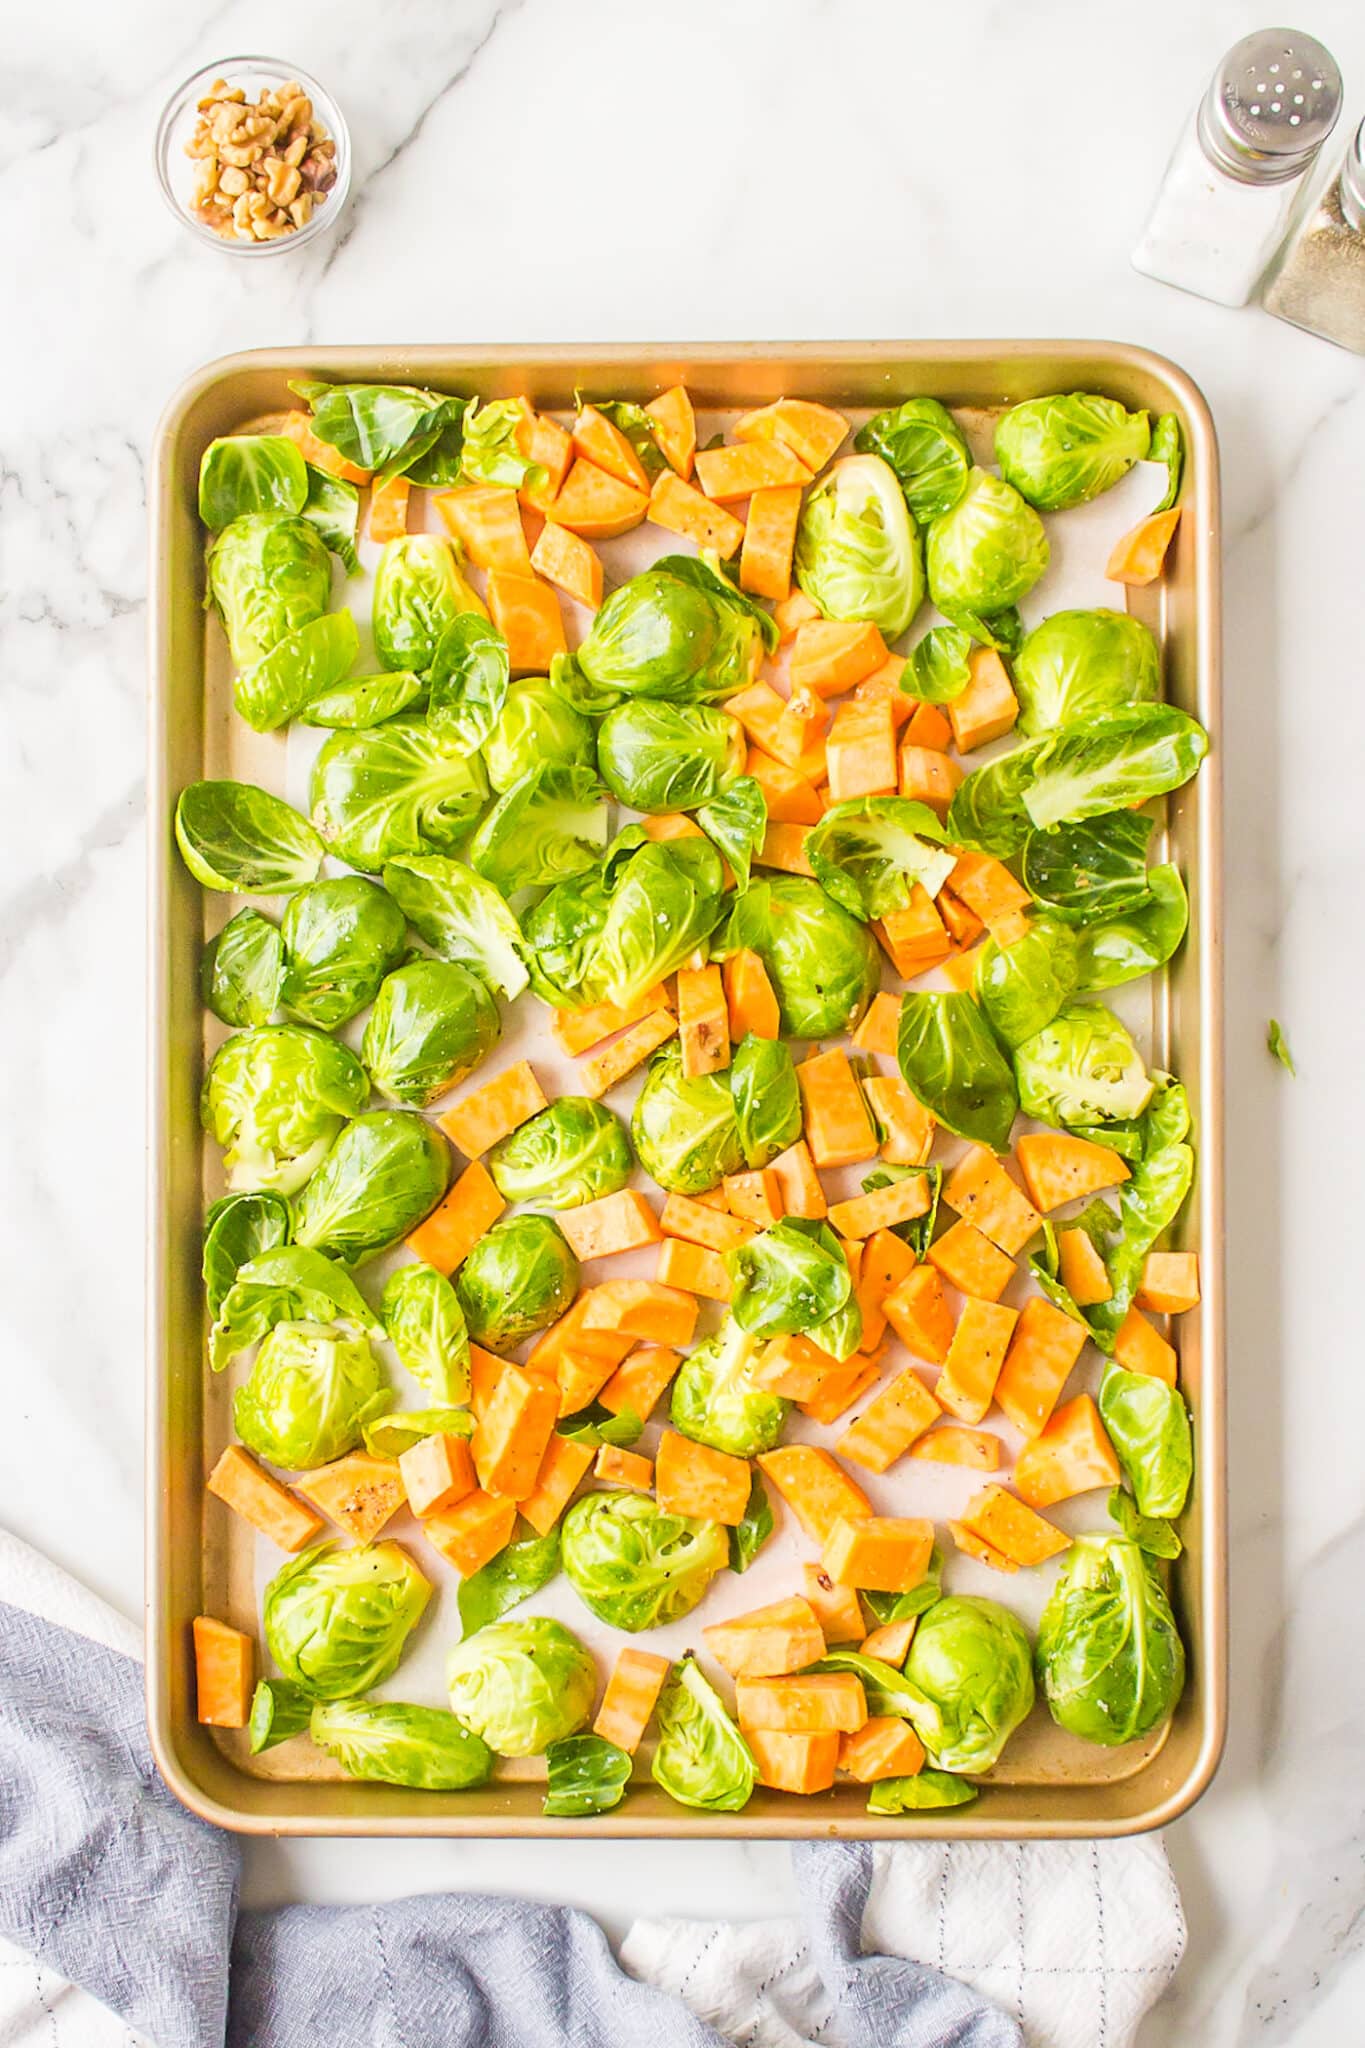 Sweet potatoes and Brussels sprouts on a parchment lined baking sheet.